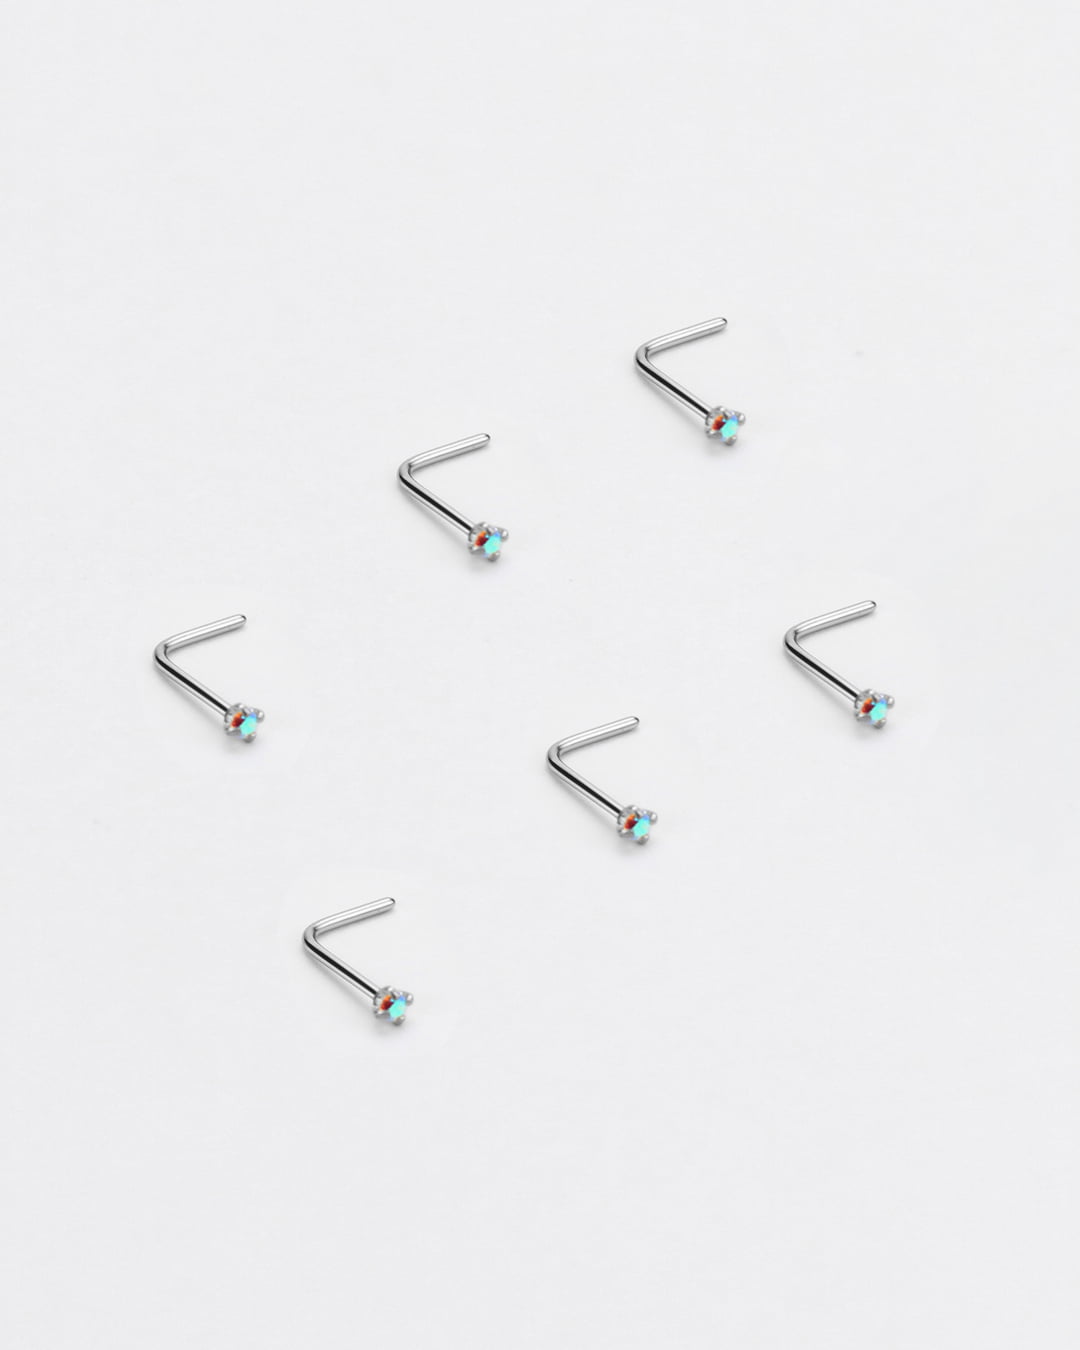 Buy 20G Tiny Diamond Nose Studs, 1.5mm/2mm/2.5mm/3mm CZ Nose Piercing,  Simple L Shape/screw/bone Nose Ring, Small Nose Stud, Gift for Her Online  in India - Etsy